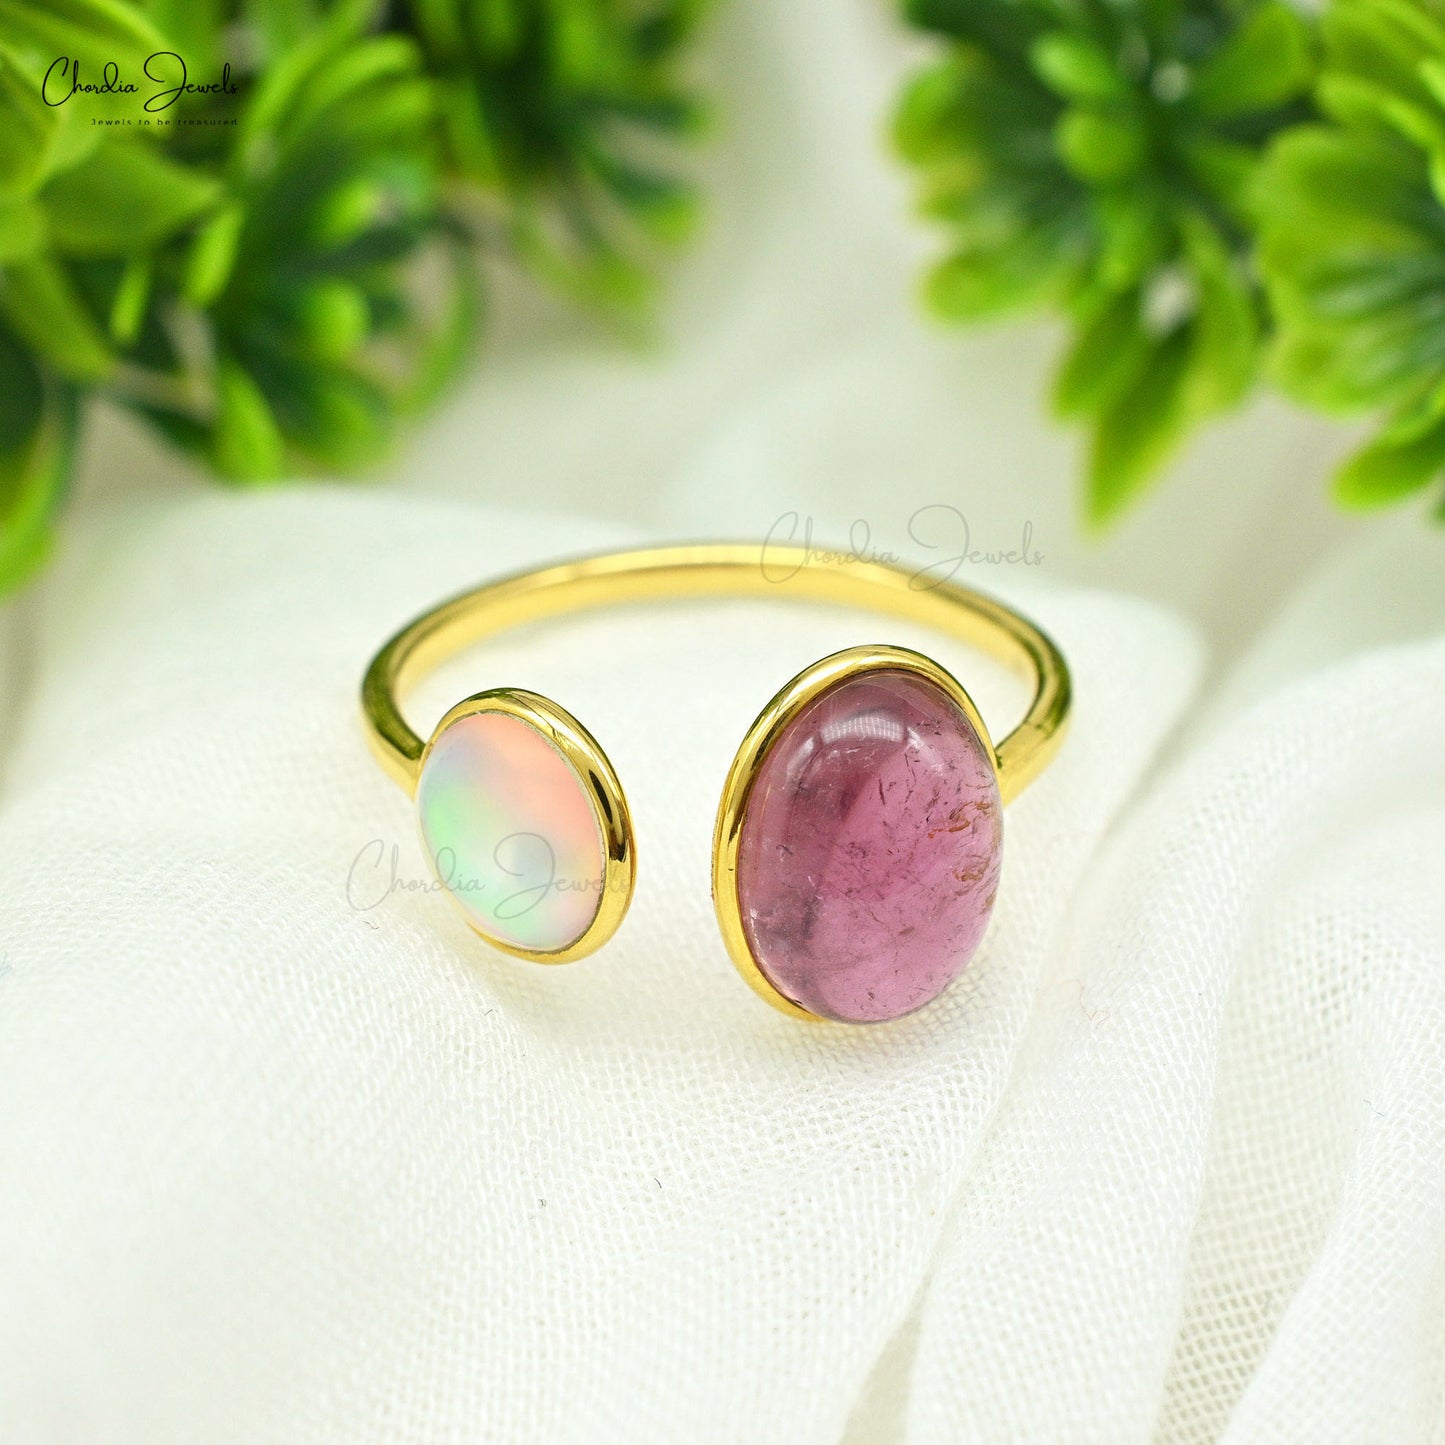 Rhodium Plated Crystal Rings - Agate, Fluorite, & Obsidian Options